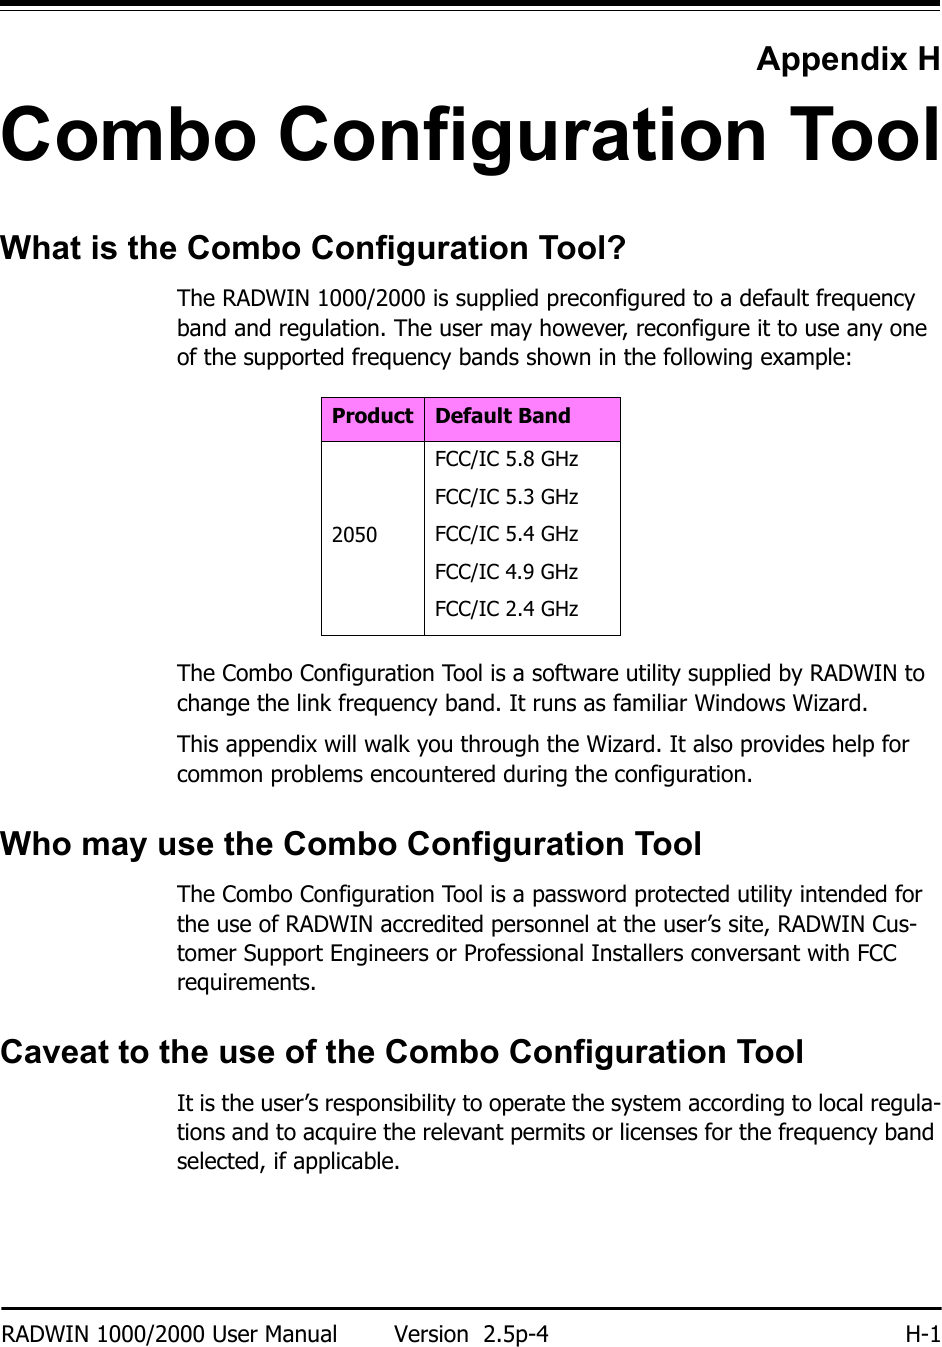 RADWIN 1000/2000 User Manual Version  2.5p-4 H-1Appendix HCombo Configuration ToolWhat is the Combo Configuration Tool?The RADWIN 1000/2000 is supplied preconfigured to a default frequency band and regulation. The user may however, reconfigure it to use any one of the supported frequency bands shown in the following example:The Combo Configuration Tool is a software utility supplied by RADWIN to change the link frequency band. It runs as familiar Windows Wizard.This appendix will walk you through the Wizard. It also provides help for common problems encountered during the configuration.Who may use the Combo Configuration ToolThe Combo Configuration Tool is a password protected utility intended for the use of RADWIN accredited personnel at the user’s site, RADWIN Cus-tomer Support Engineers or Professional Installers conversant with FCC requirements.Caveat to the use of the Combo Configuration ToolIt is the user’s responsibility to operate the system according to local regula-tions and to acquire the relevant permits or licenses for the frequency band selected, if applicable.Product Default Band2050FCC/IC 5.8 GHzFCC/IC 5.3 GHzFCC/IC 5.4 GHzFCC/IC 4.9 GHzFCC/IC 2.4 GHz